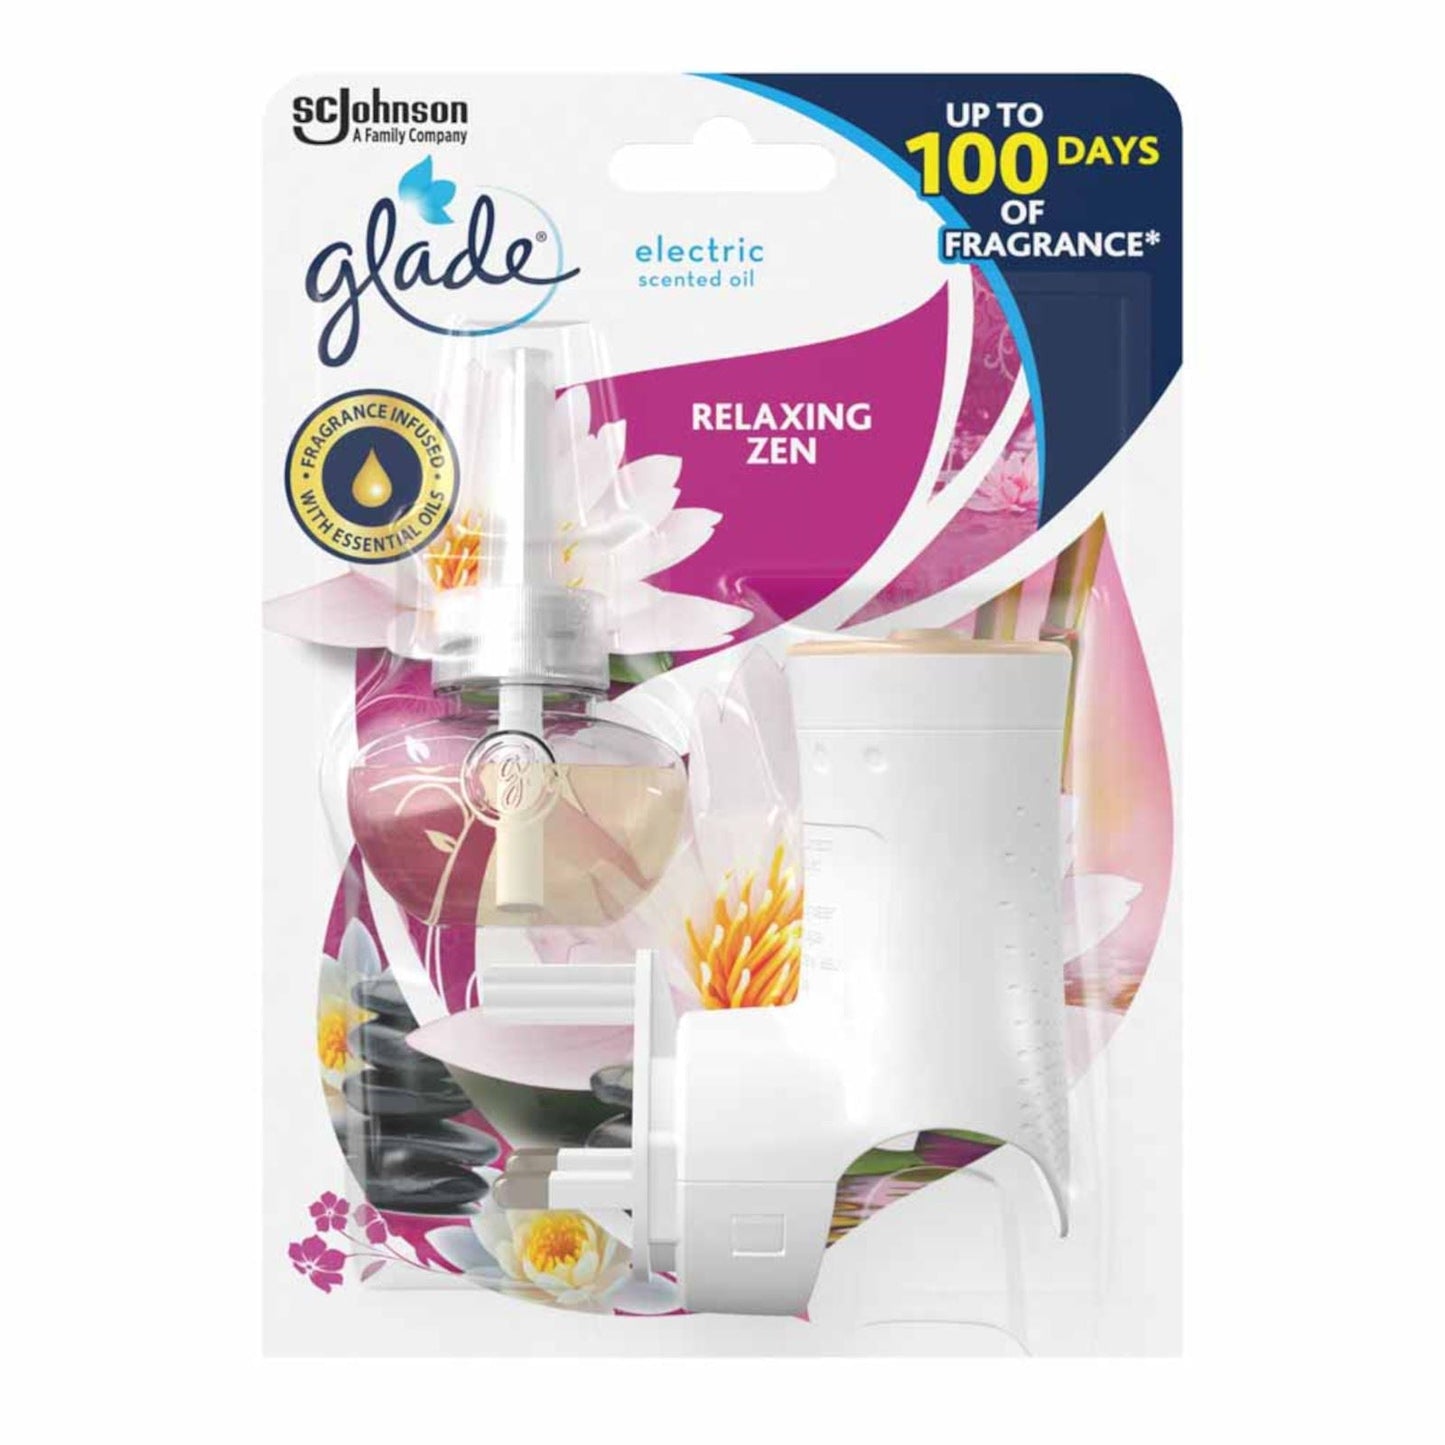 Glade Electric Scented Oil Relaxing Zen Plug Unit 20ml